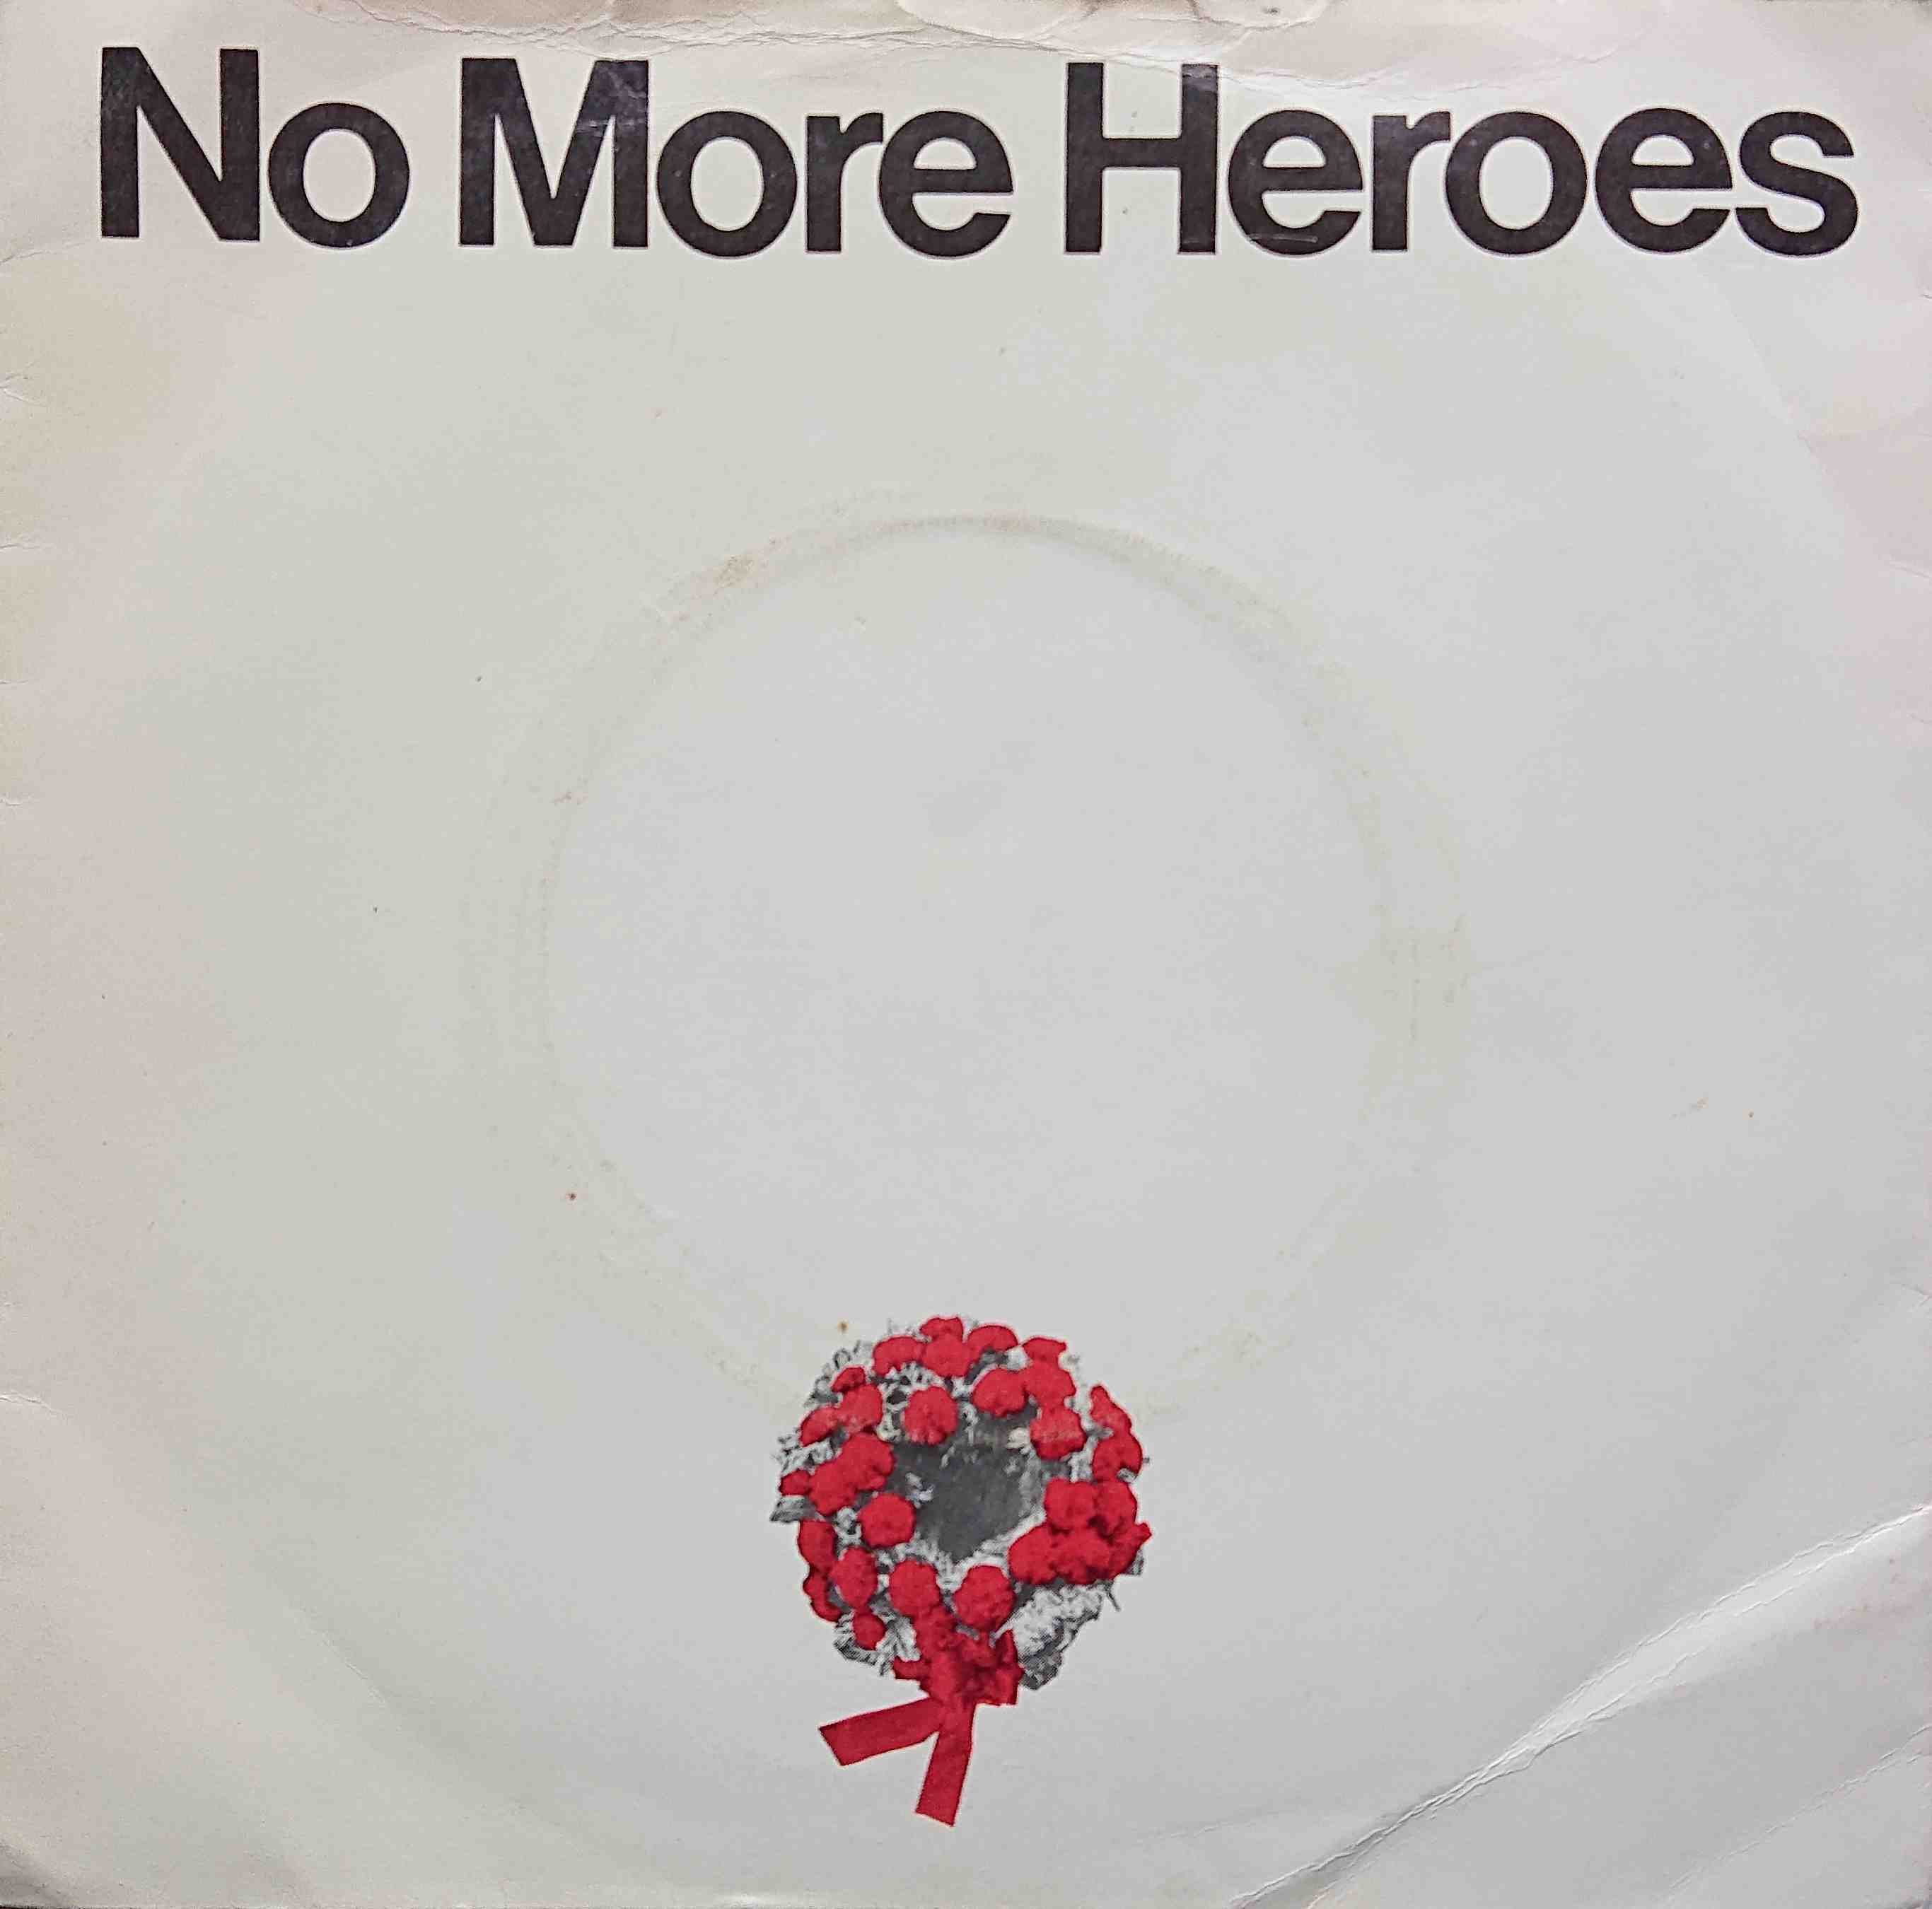 Picture of No more heroes by artist The Stranglers  from The Stranglers singles